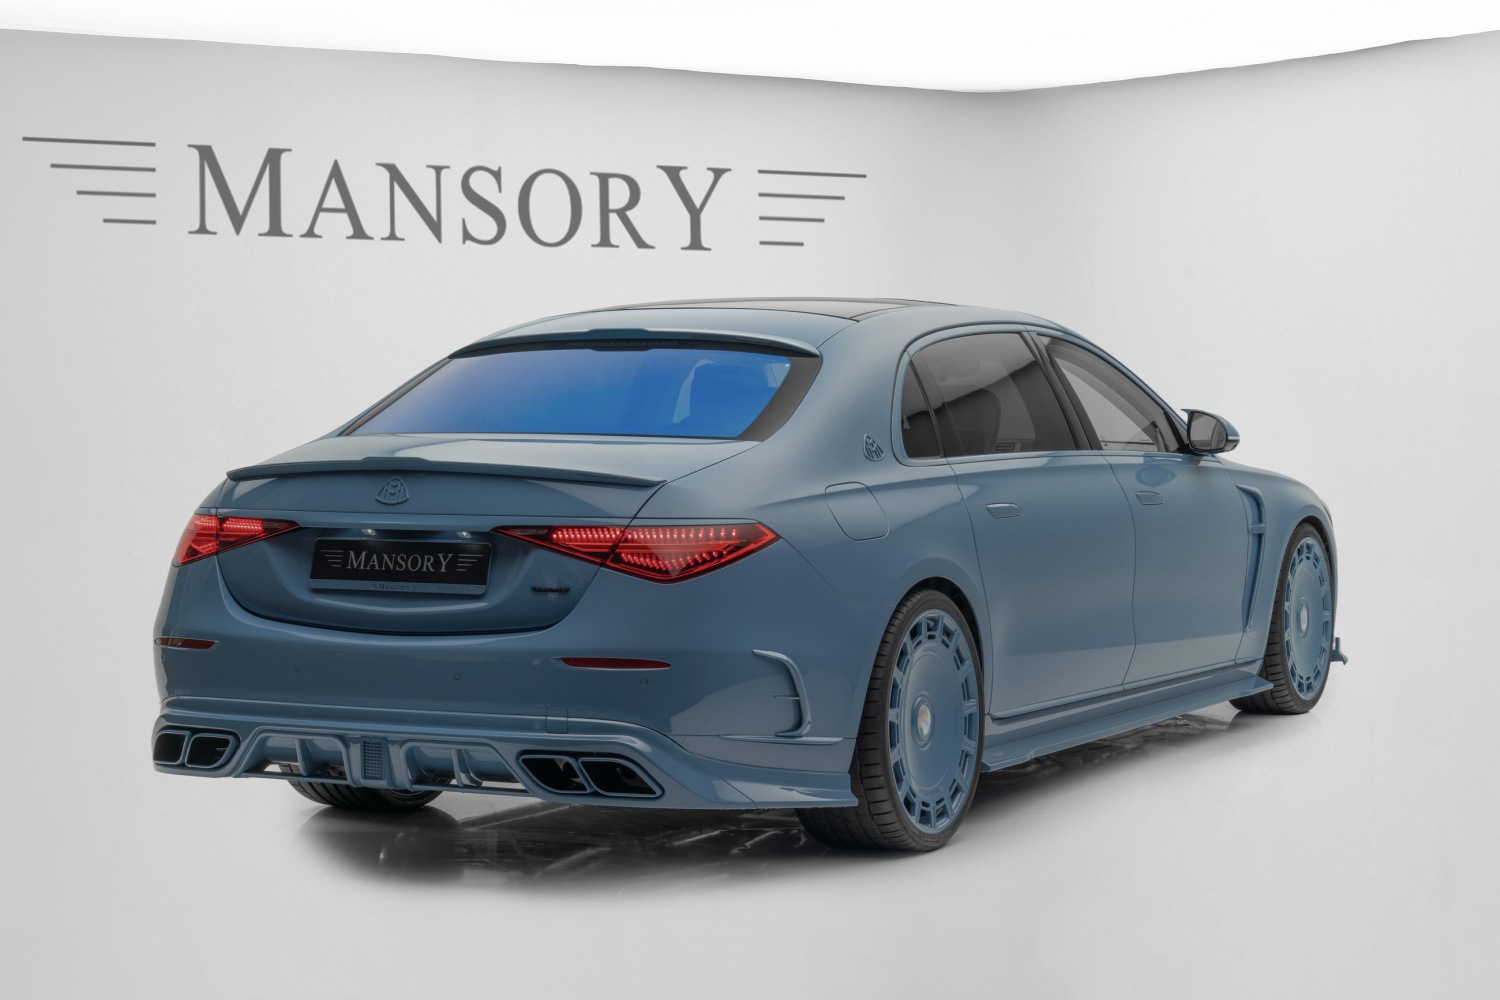 Mercedes-Maybach S-Class by MANSORY